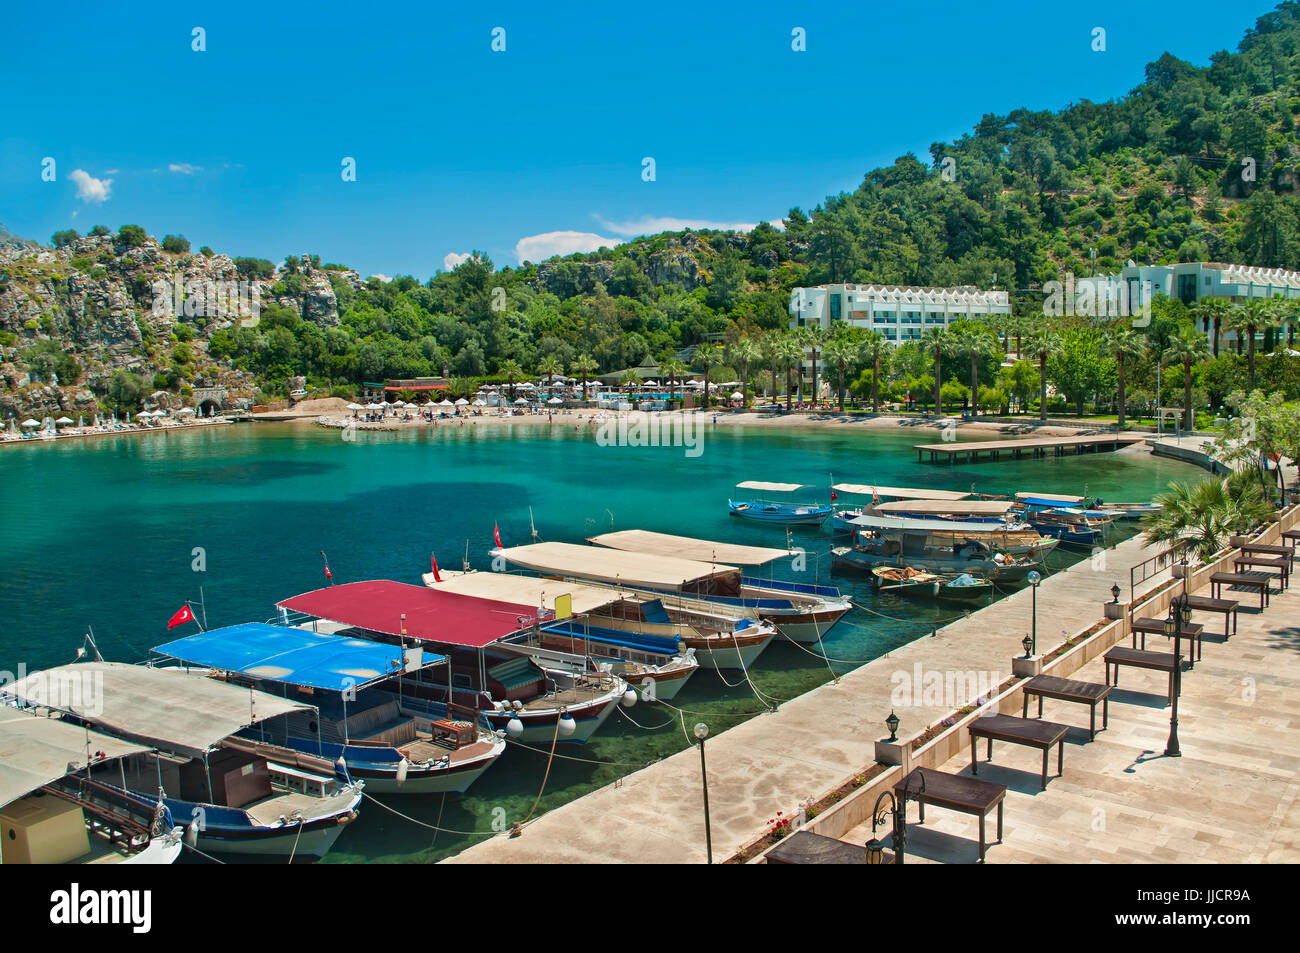 small tourist taxi boats moored in row at waterfront promenade with beach and hotels at background in small town of Turunc near Marmaris, Turkey Stock Photo